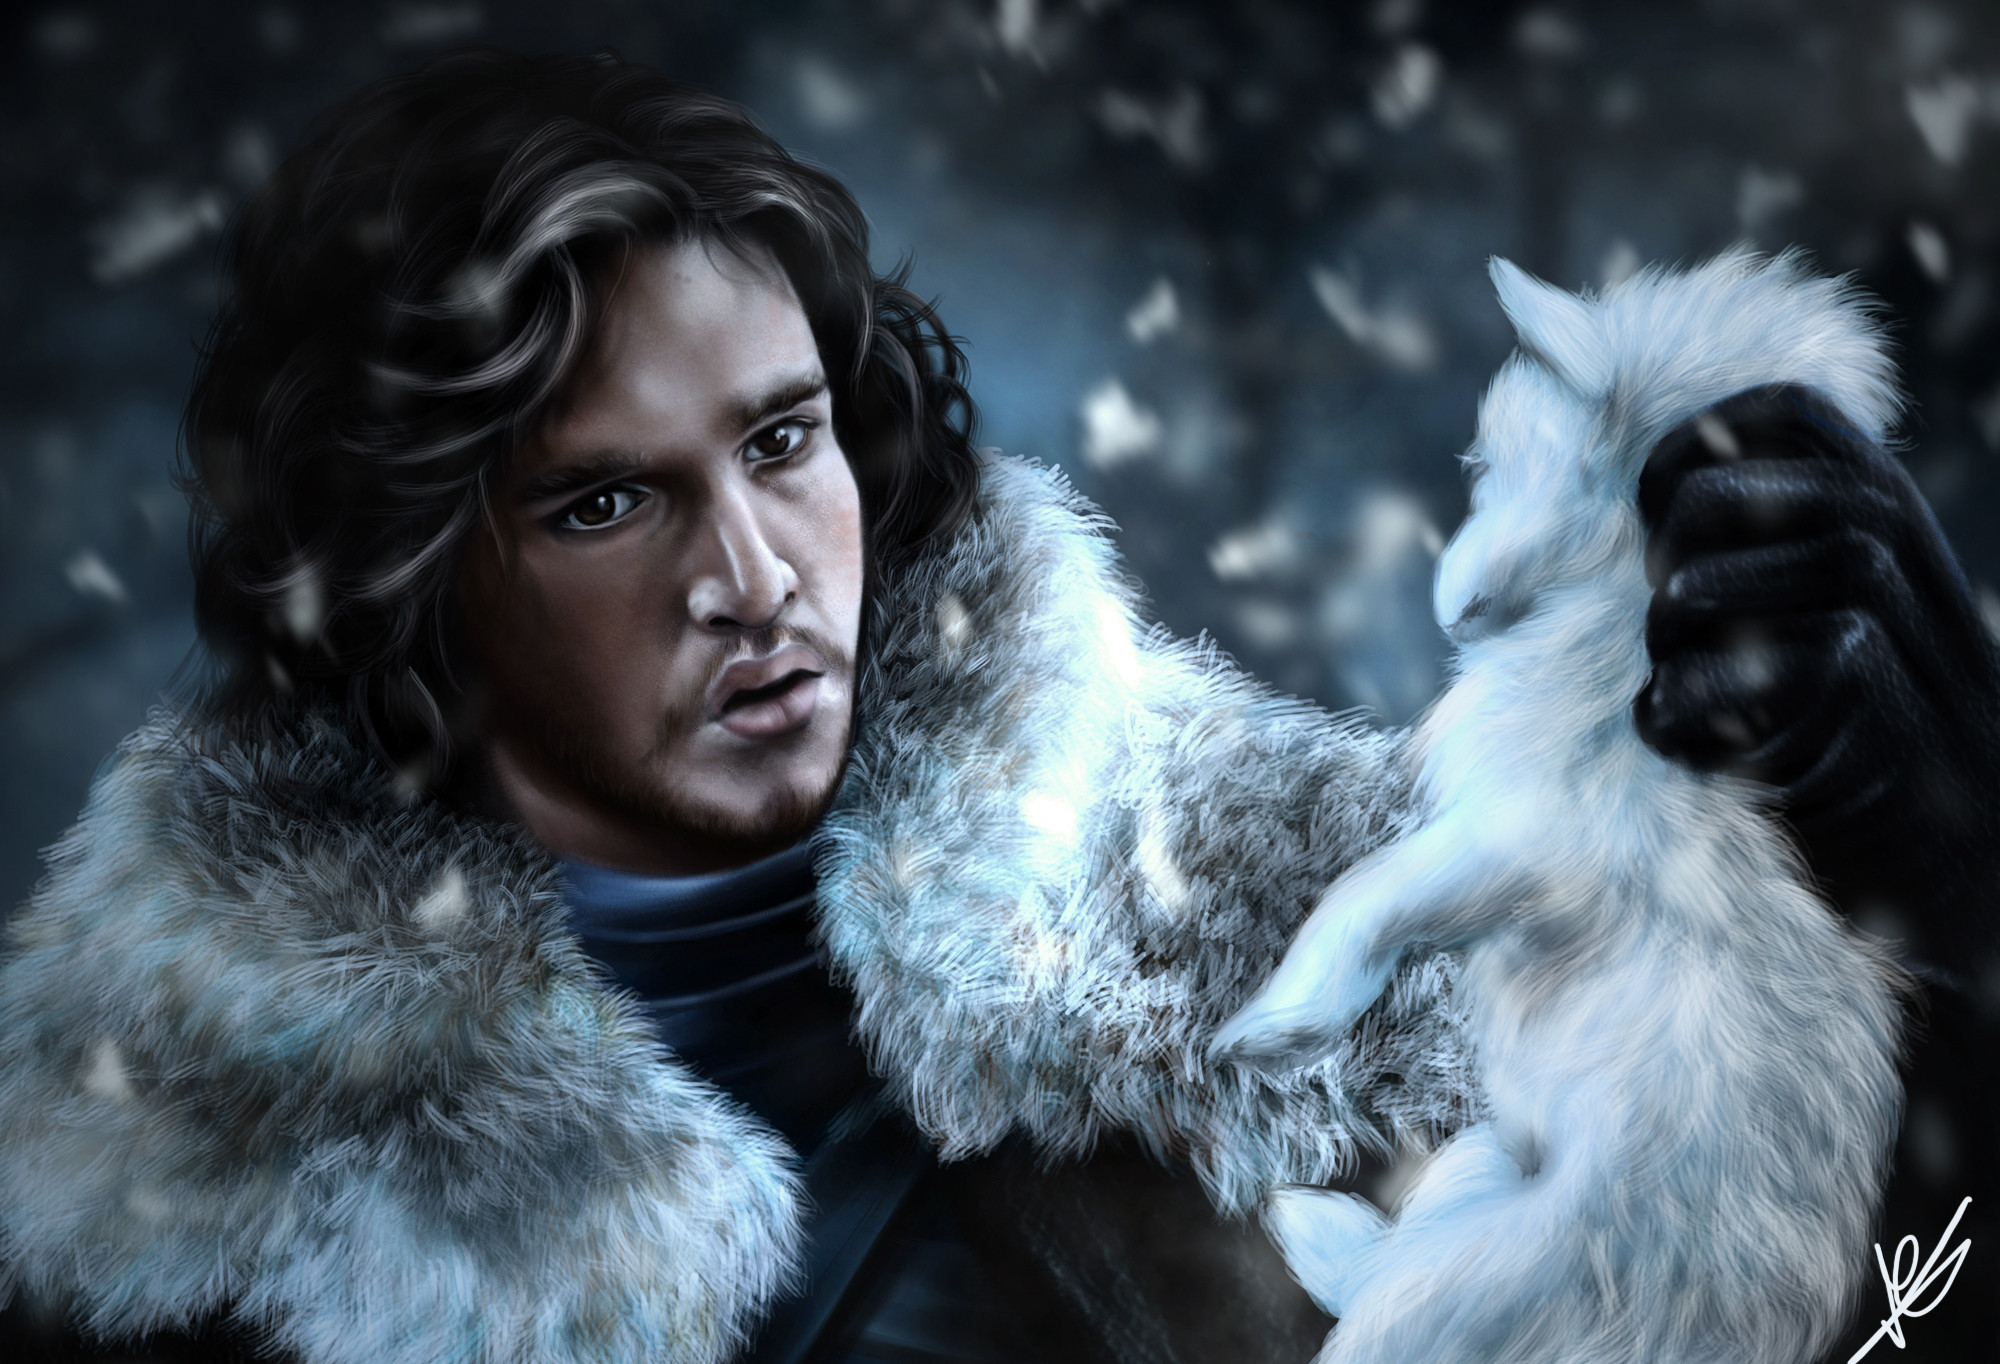 2000x1364 jon snow, Game of Thrones, Game of Thrones, watch, man, face, wolf,  painting, art - Magic4Walls.com